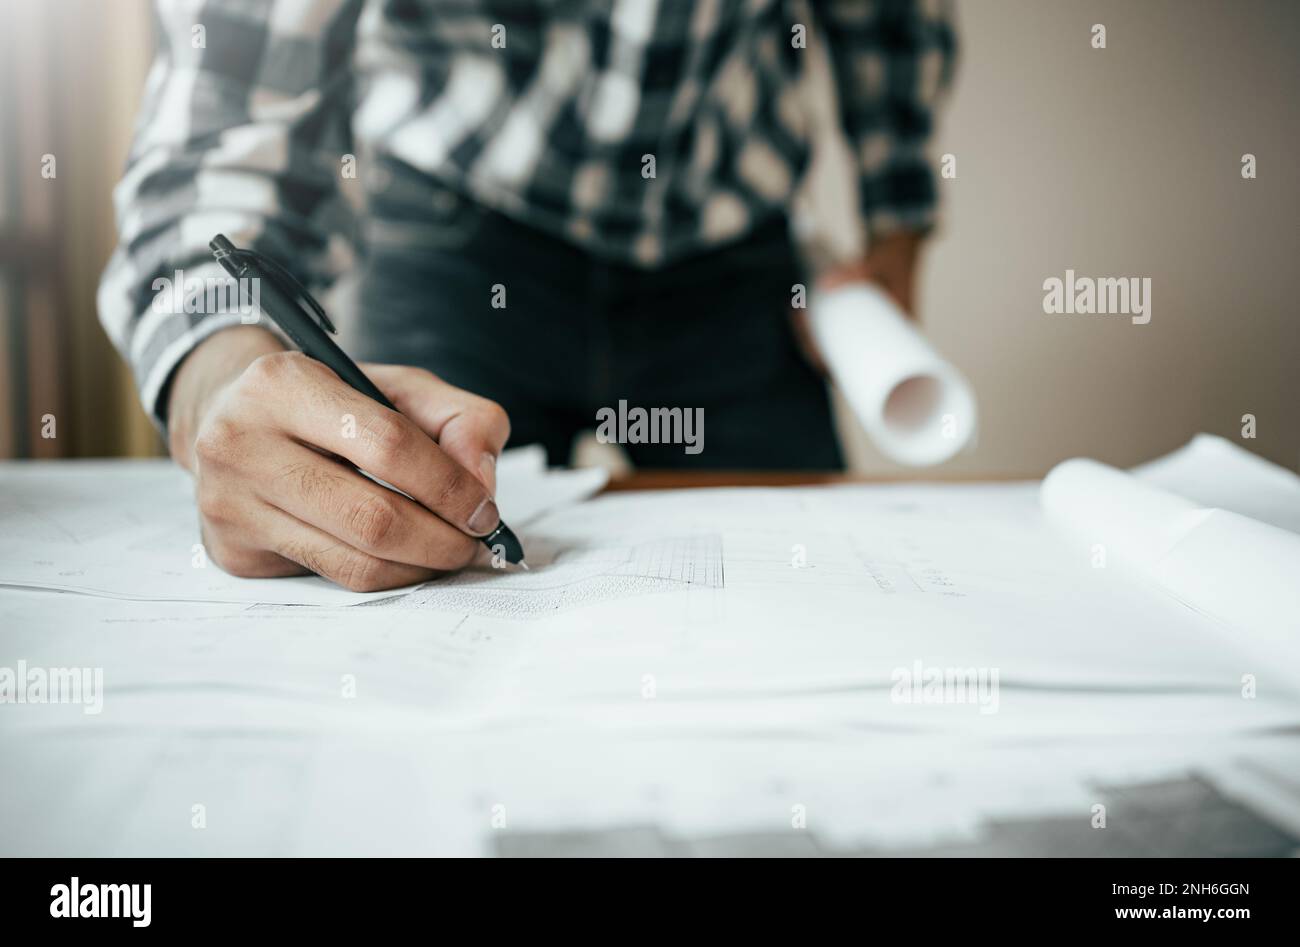 Close-up of asian male civil engineer working on blueprint architecture project on construction site at work desk in office. Stock Photo